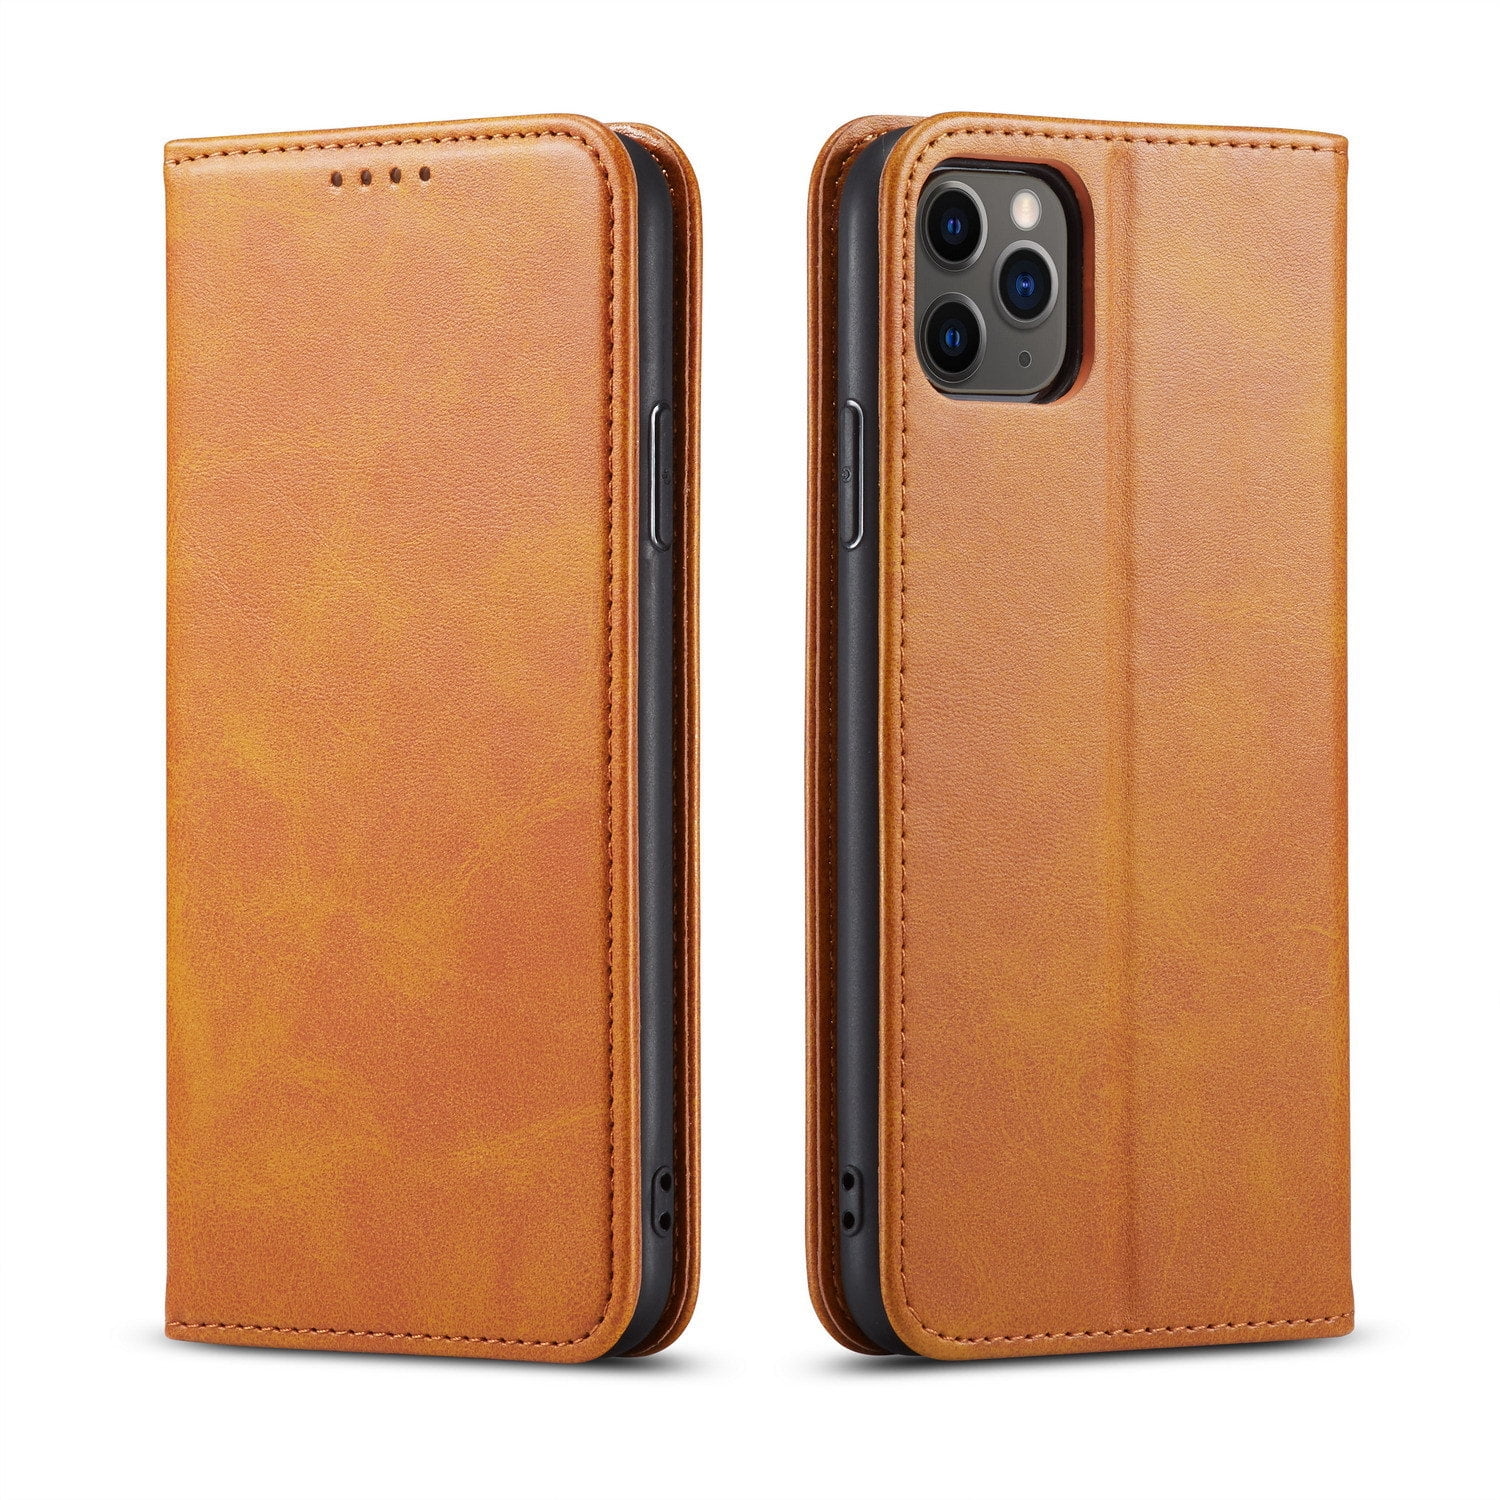 Brown Wallet Case for iPhone Xs Max PU Leather Flip Cover Compatible with iPhone Xs Max 